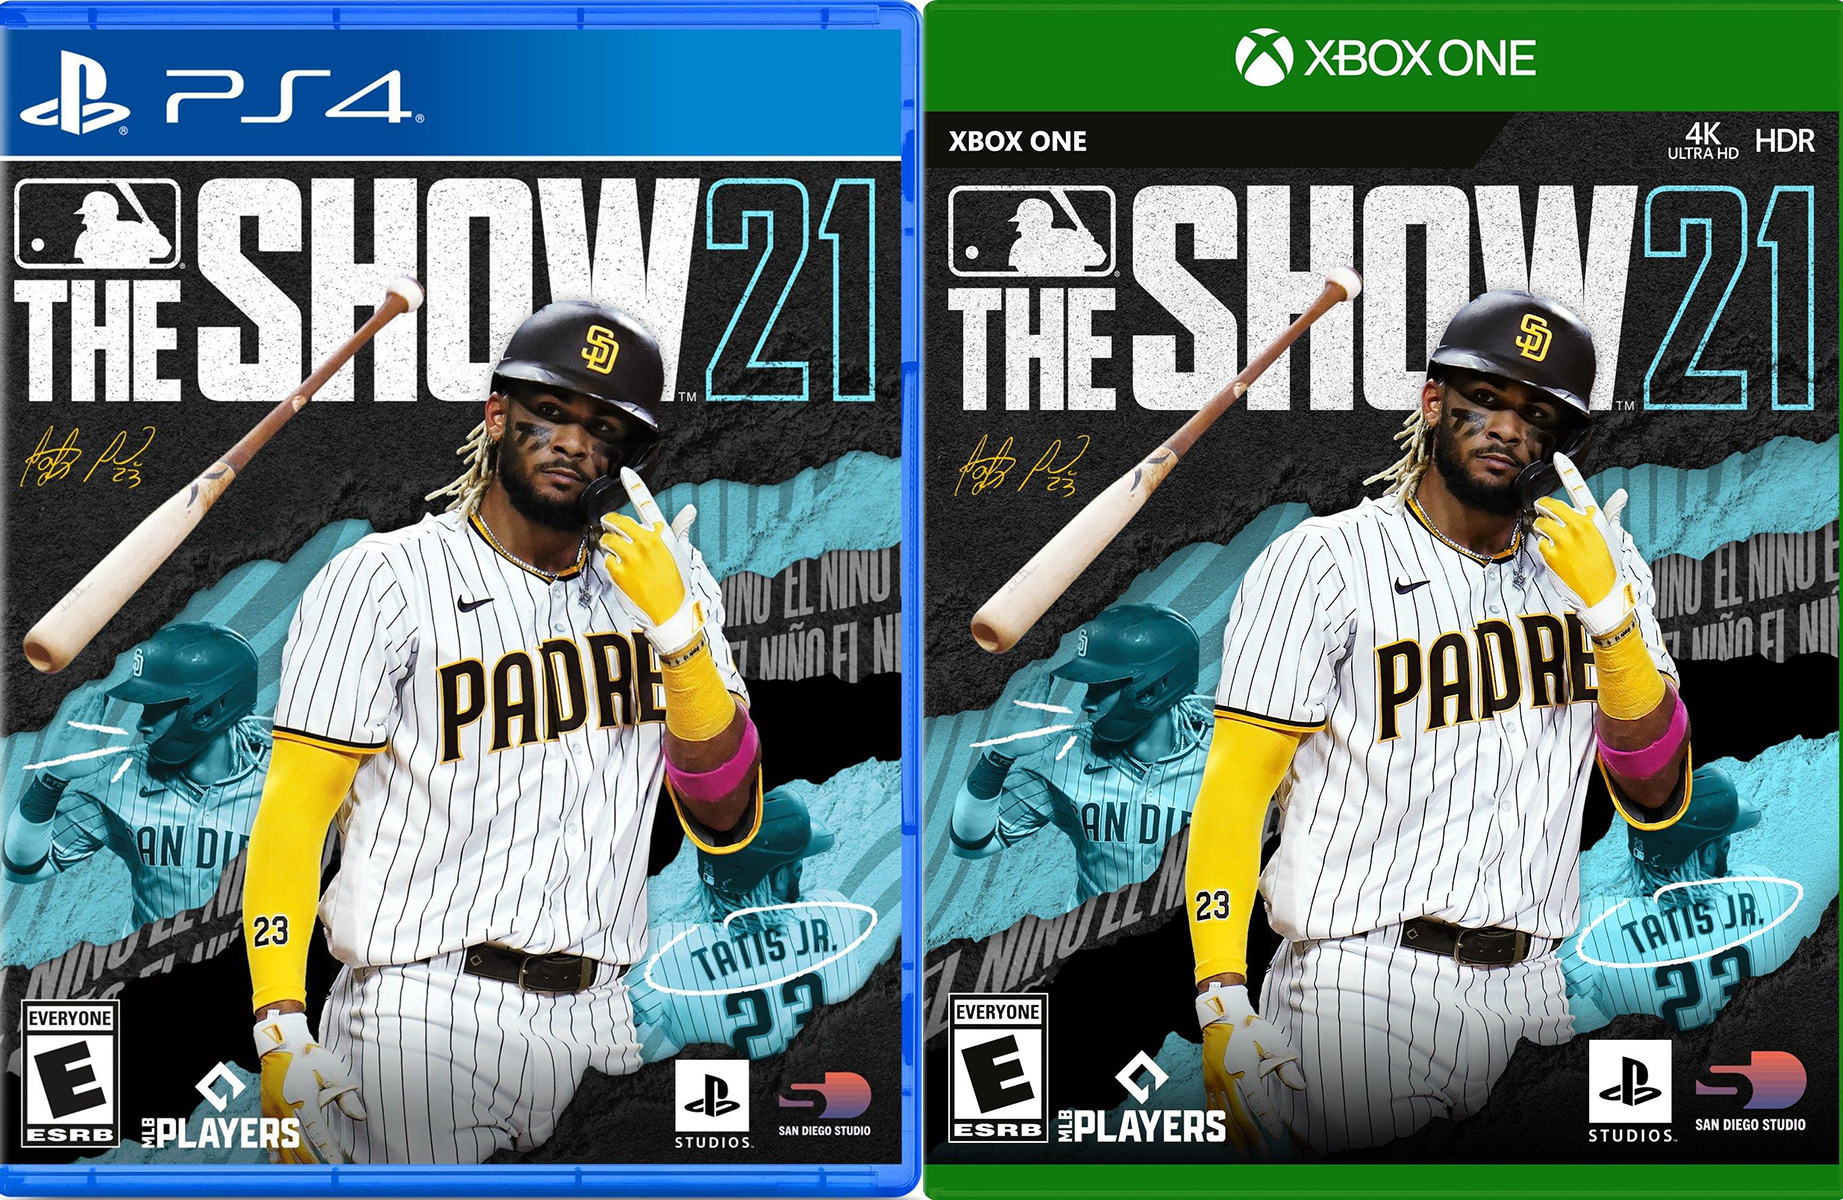 Looks Like Fernando Tatis Jr Is The Cover Athlete For Mlb The Show 21 Coming To Playstation 4 Playstation 5 Xbox One And Xbox Series X S Operation Sports